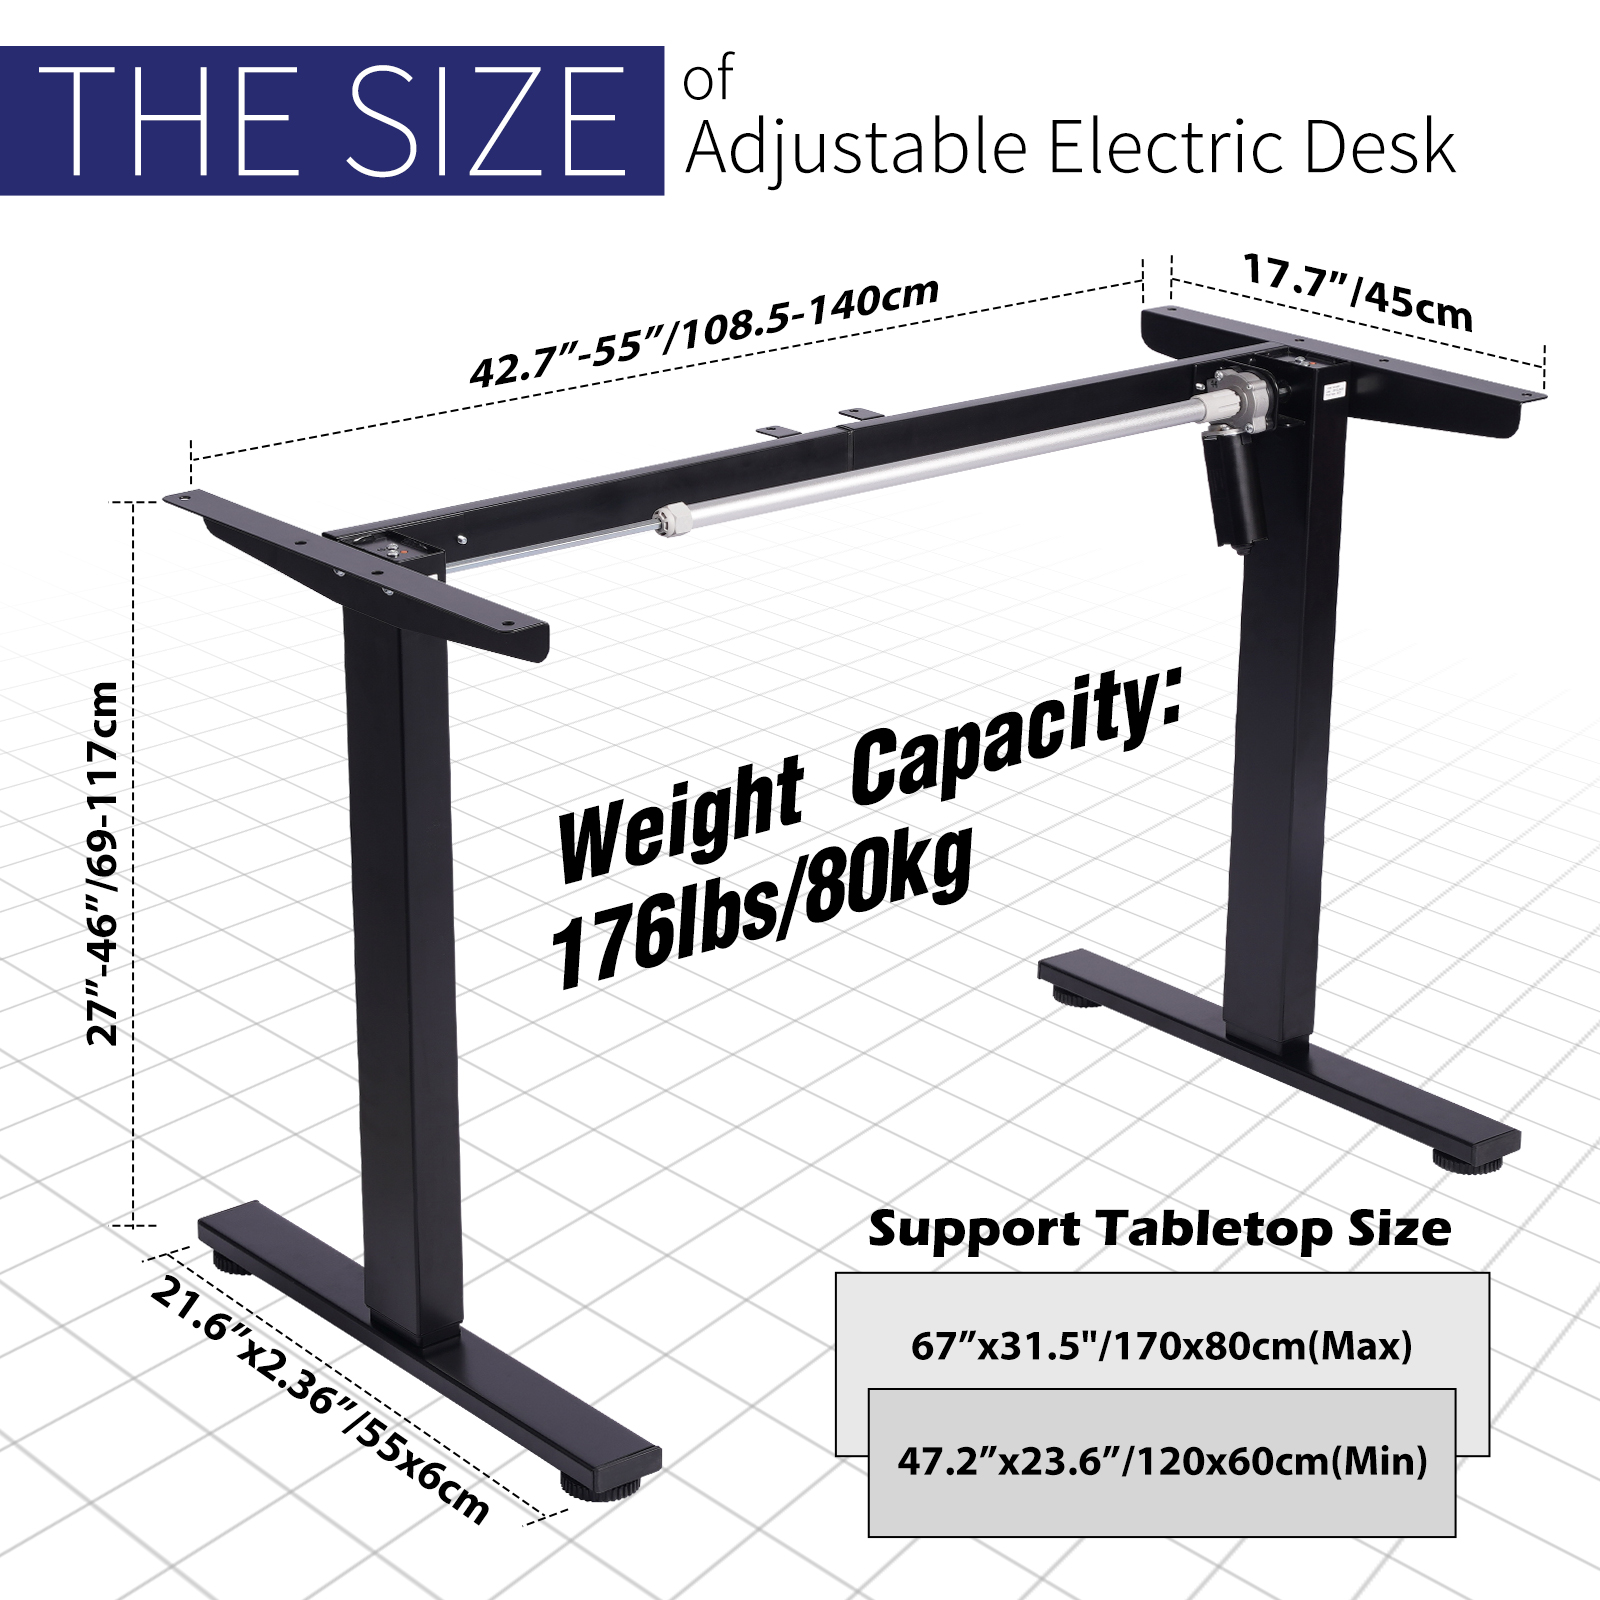 TOPSKY Single Motor Electric Adjustable Standing Computer Desk for Home and Office DF01.01